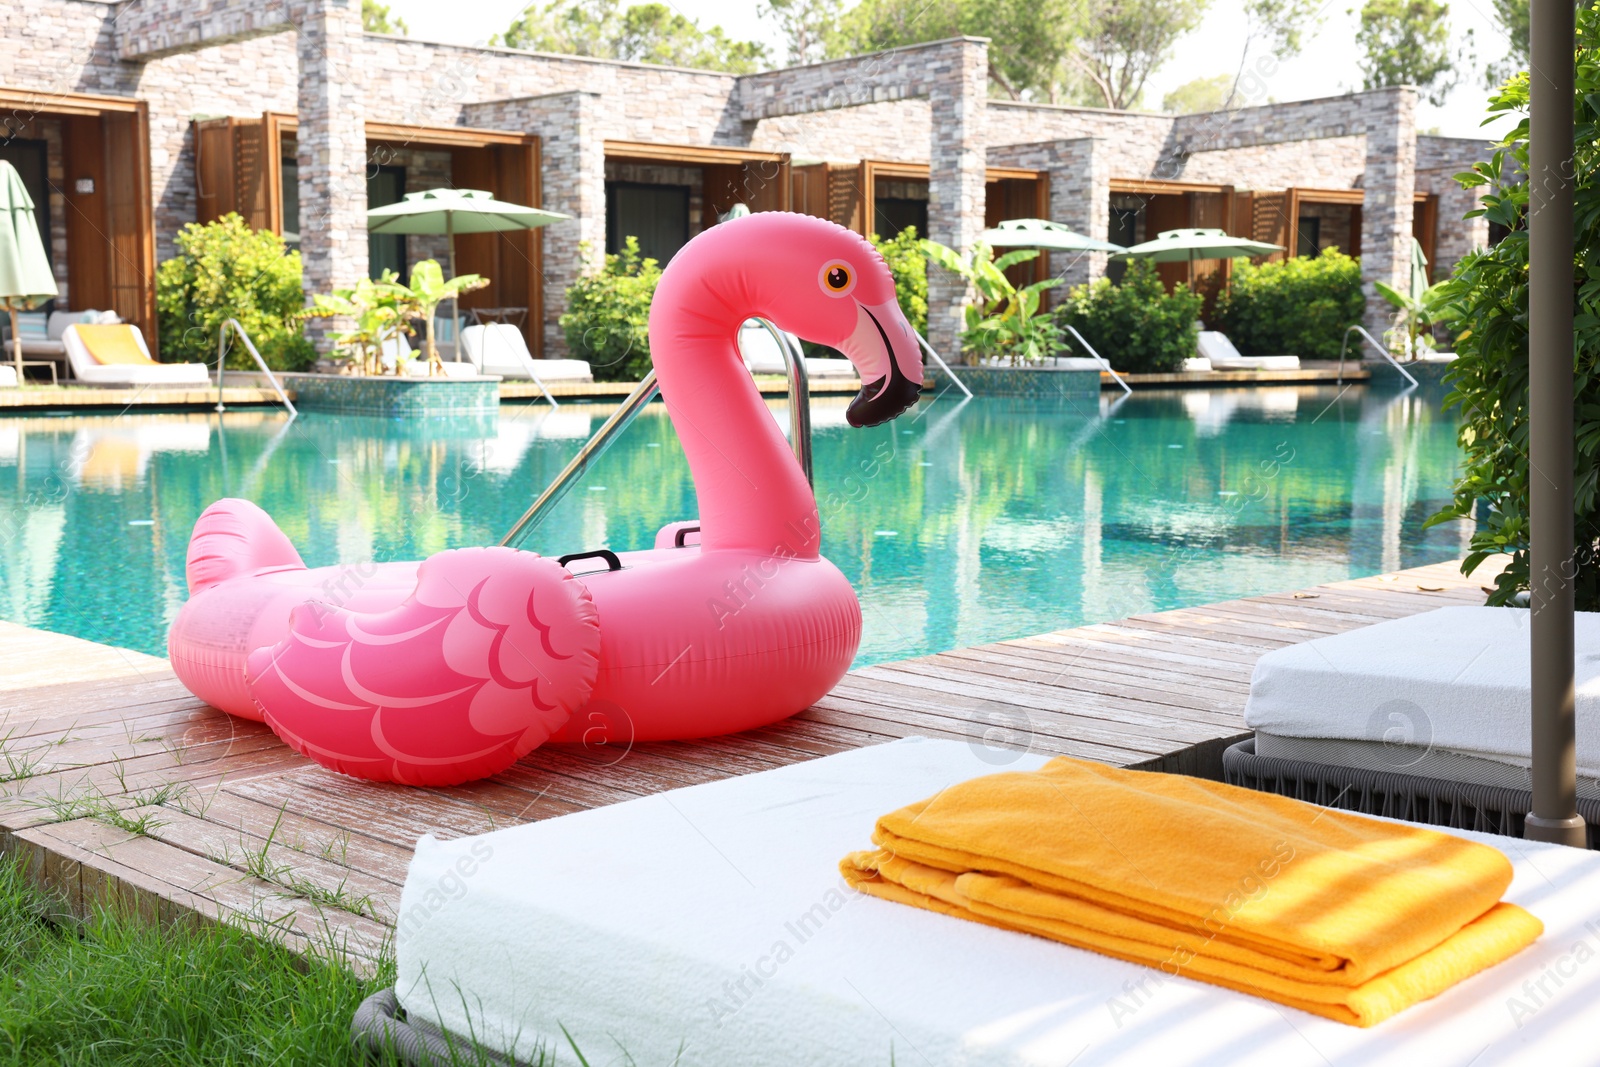 Photo of Float in shape of flamingo on wooden deck near swimming pool and sunbeds at luxury resort